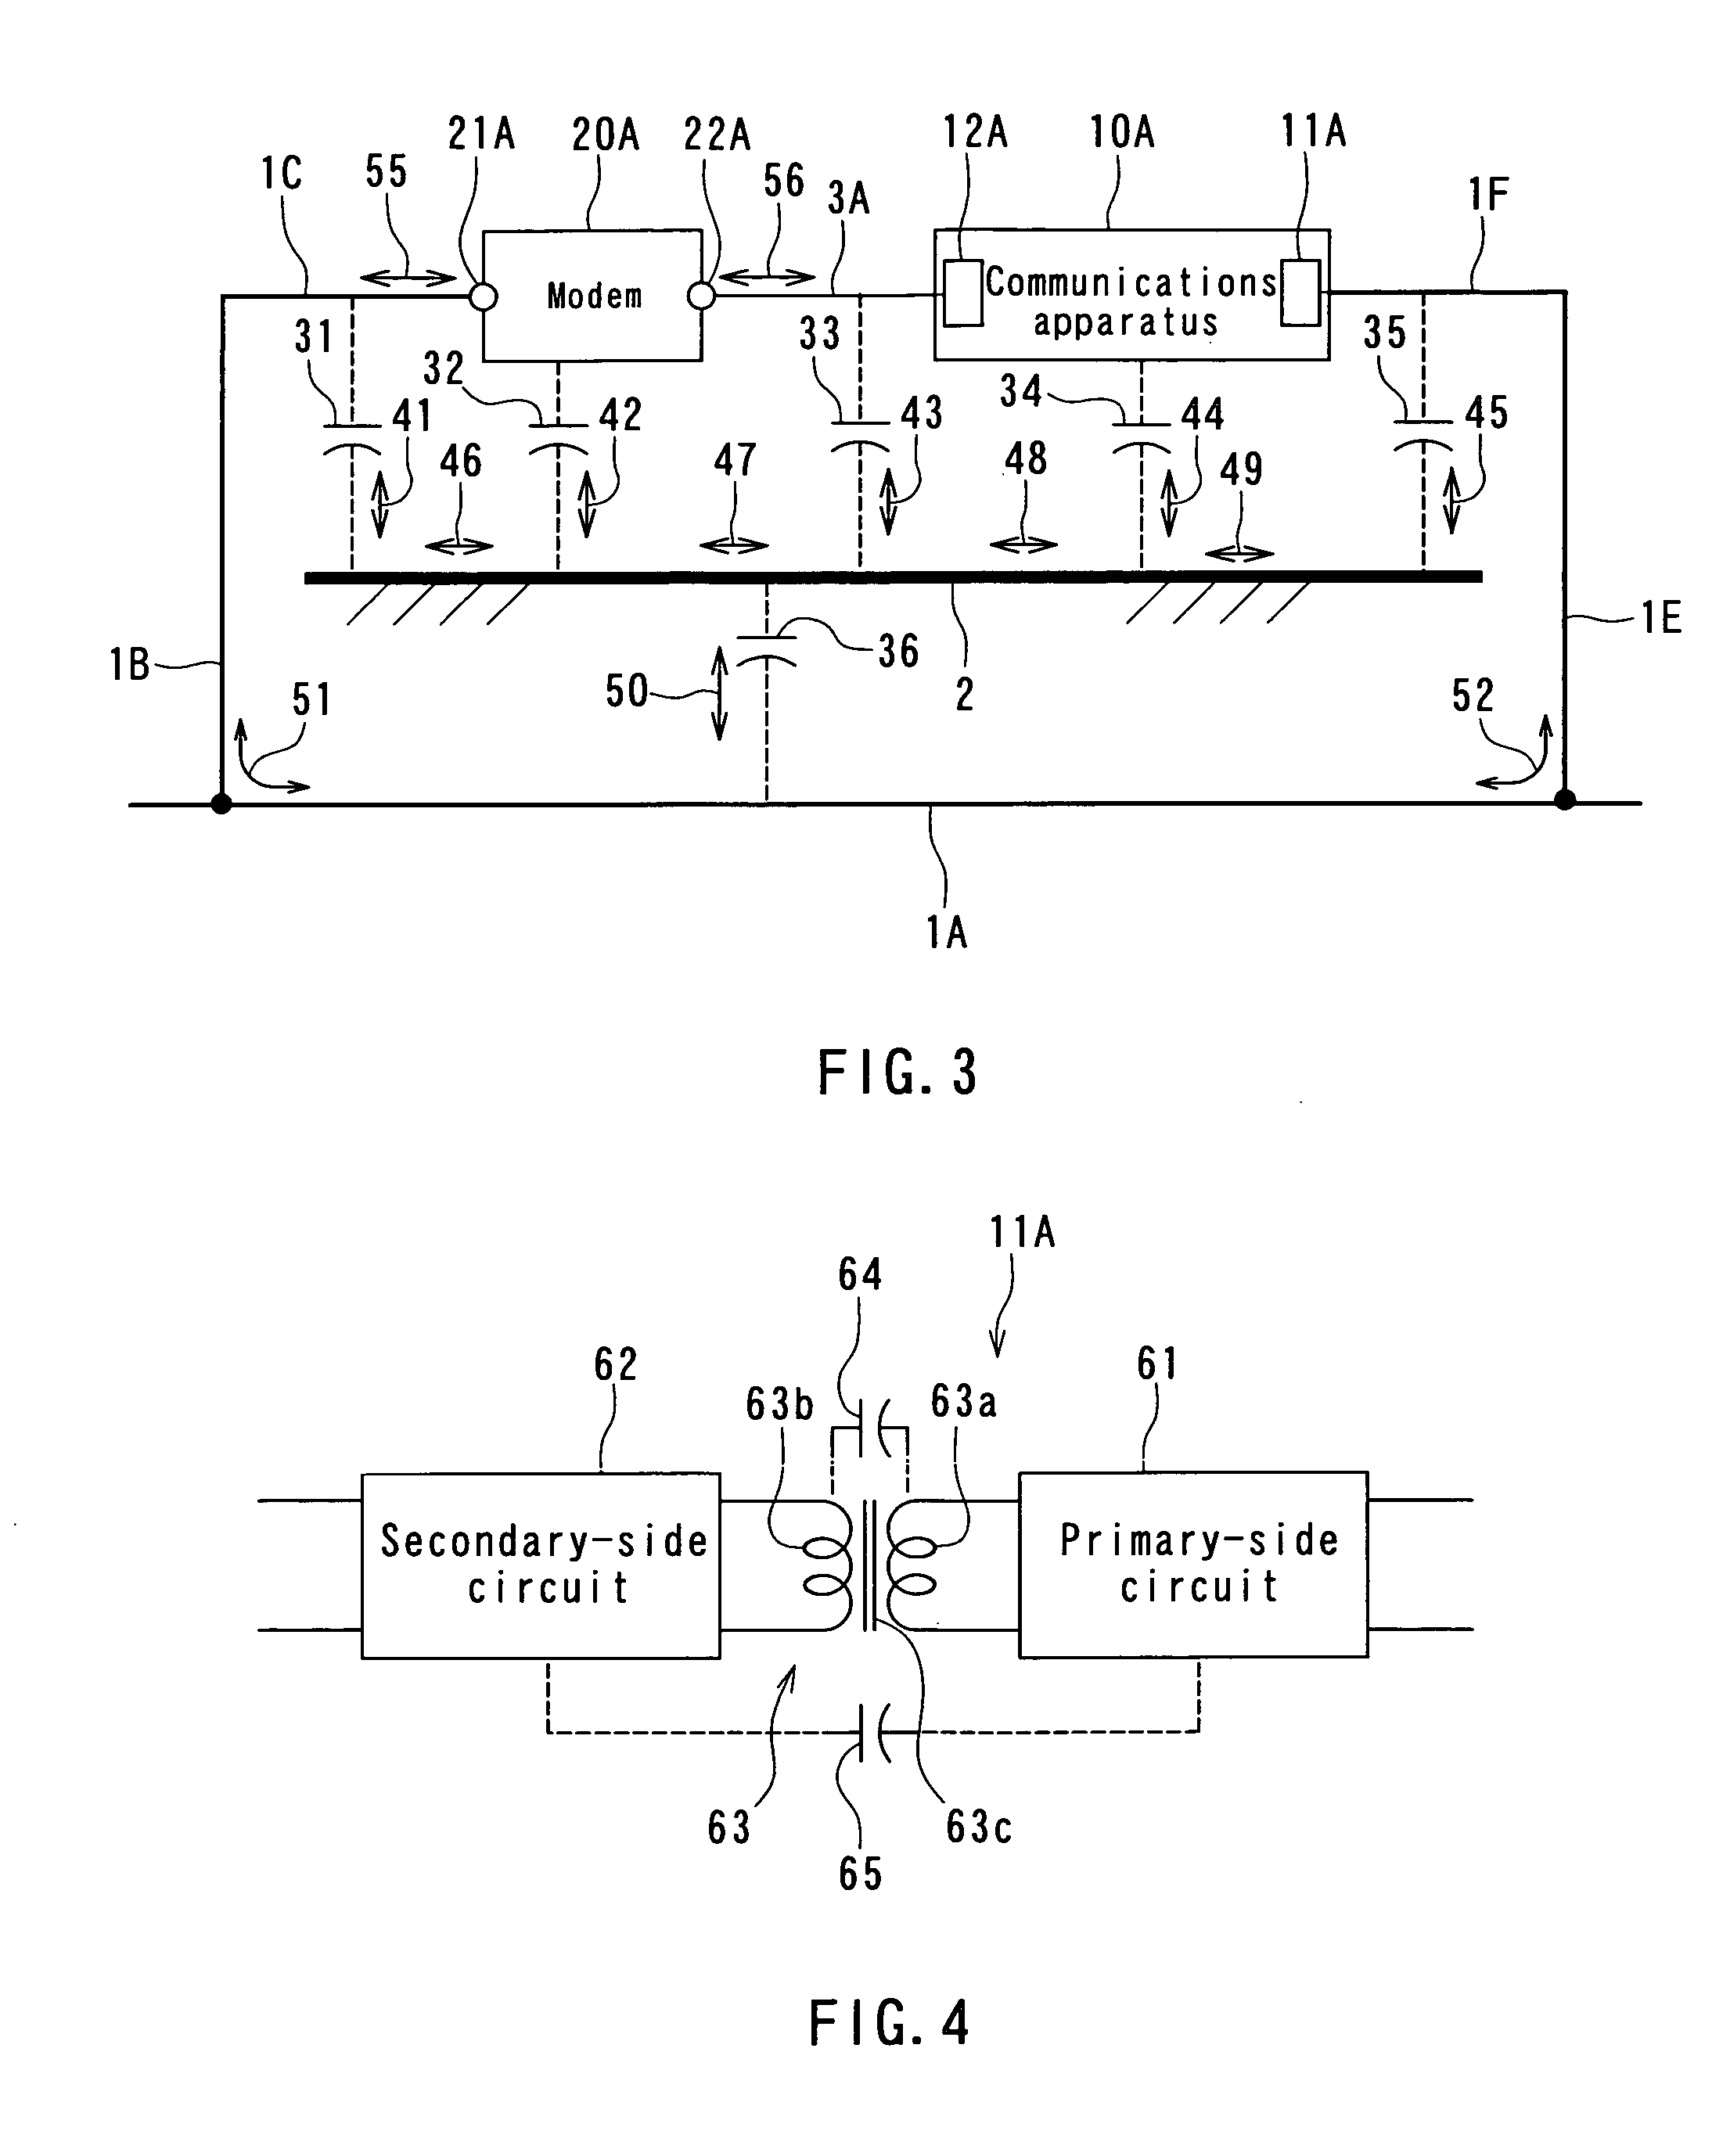 Power supply line communication modem and power supply line communication system